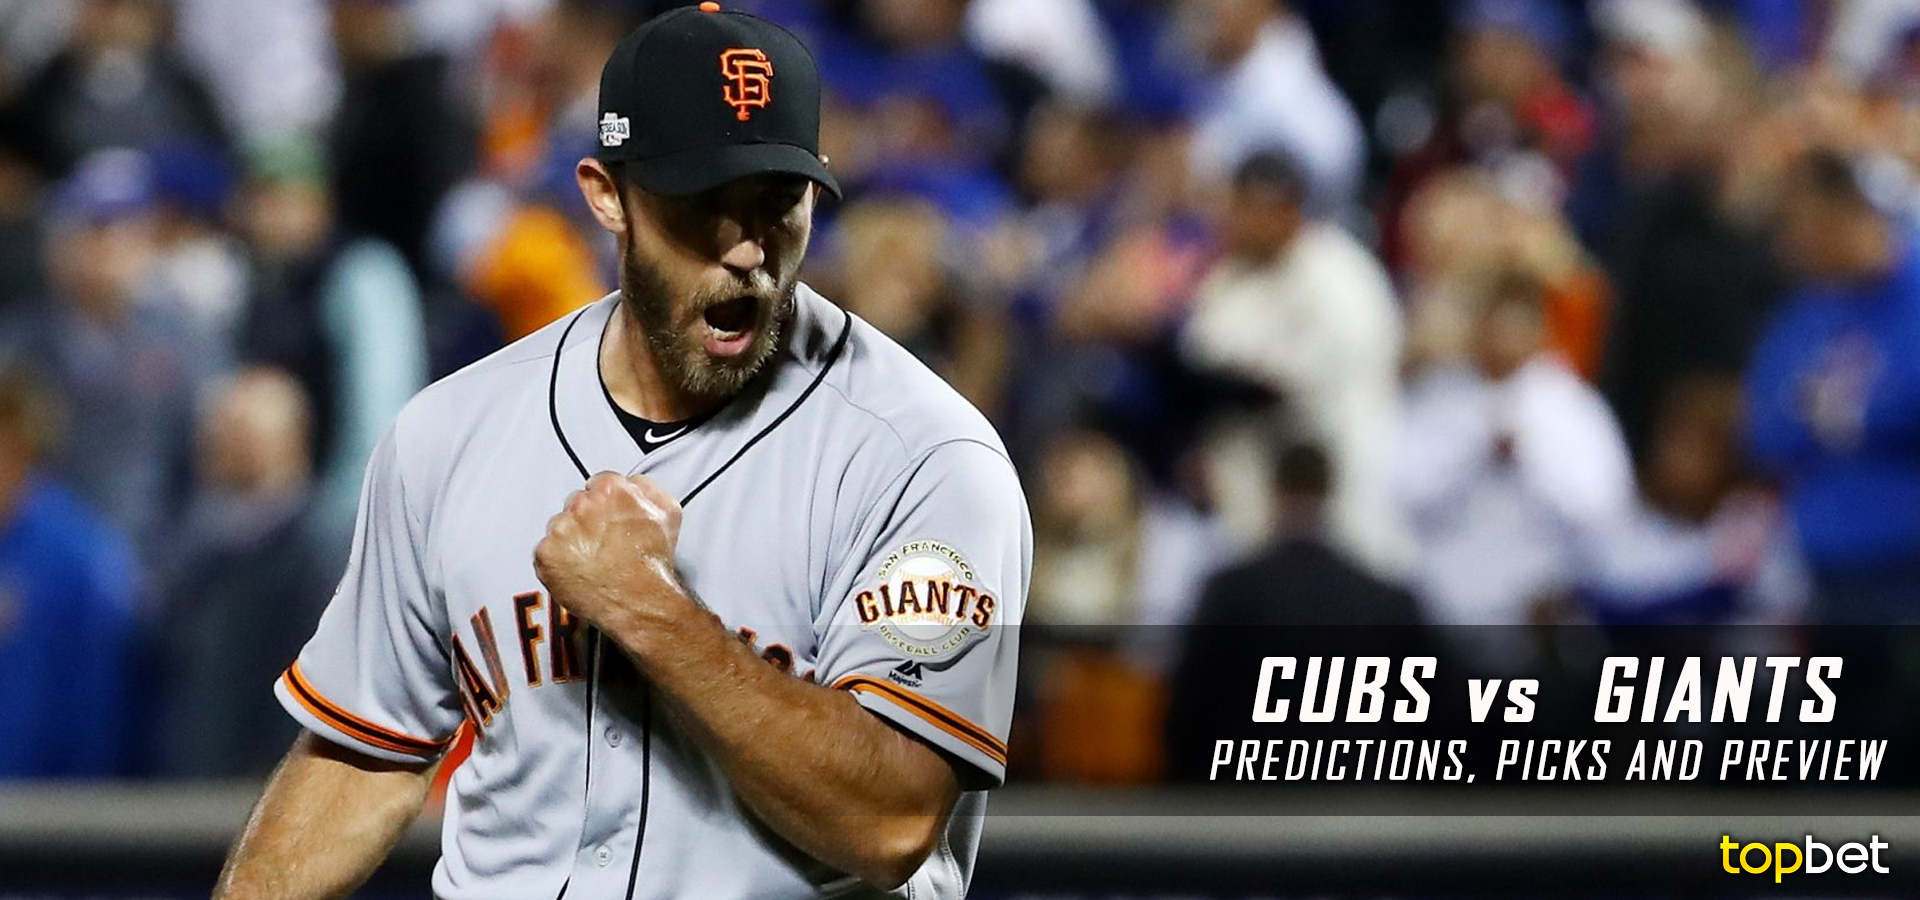 Cubs vs Giants 2016 NLDS Game 3 Predictions, Picks & Preview1920 x 900